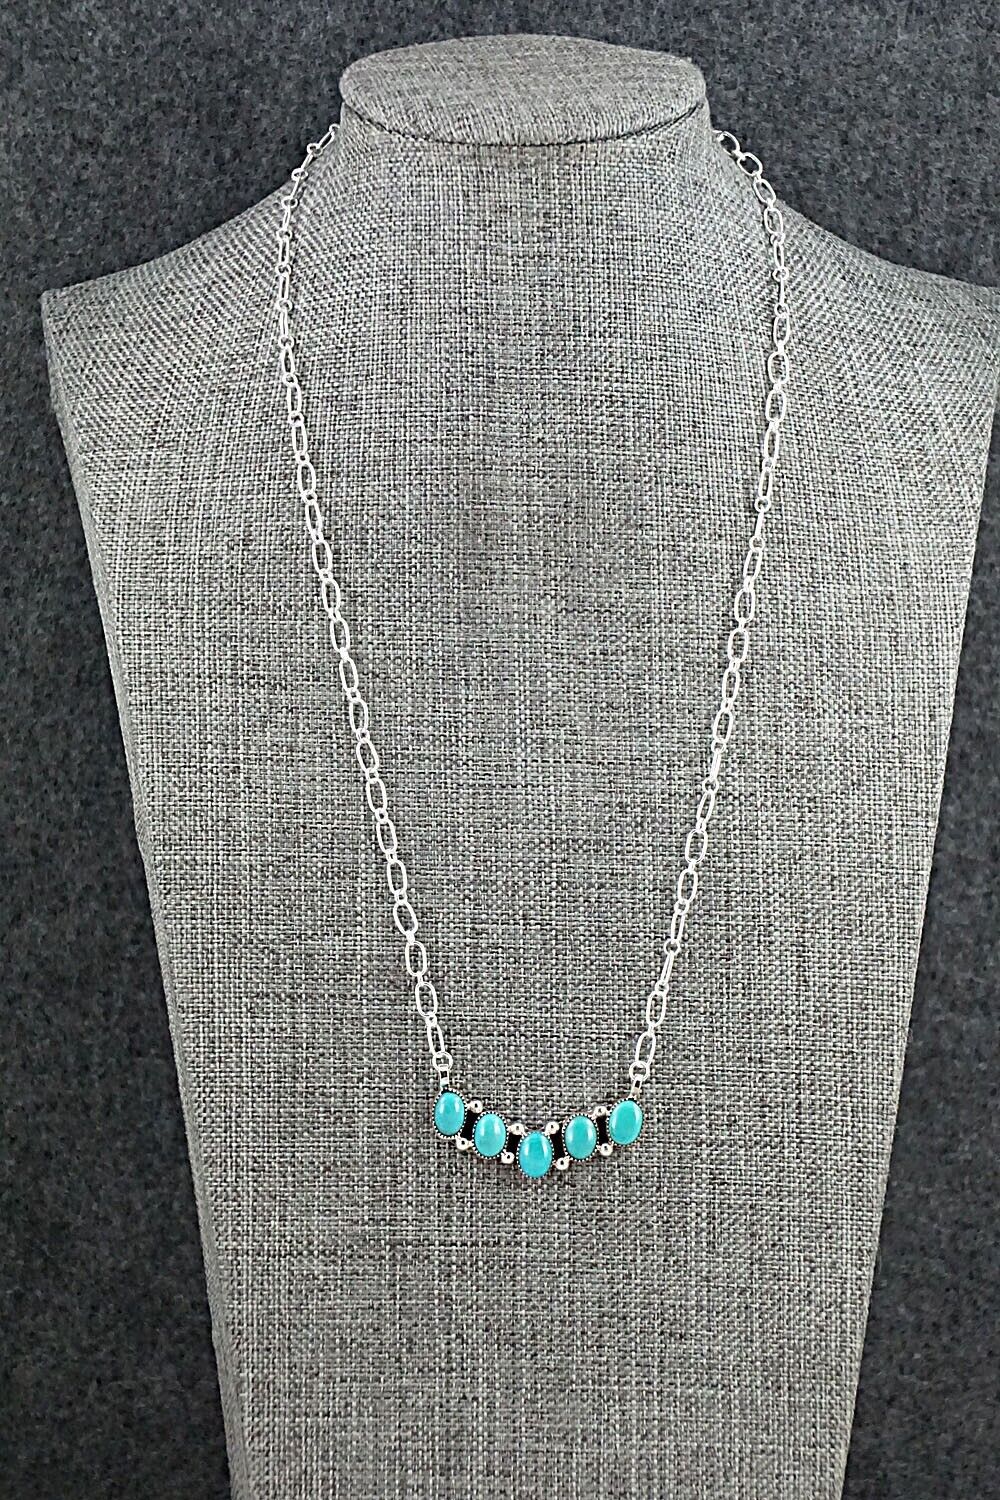 Turquoise & Sterling Silver Necklace - Kimberly Yazzie